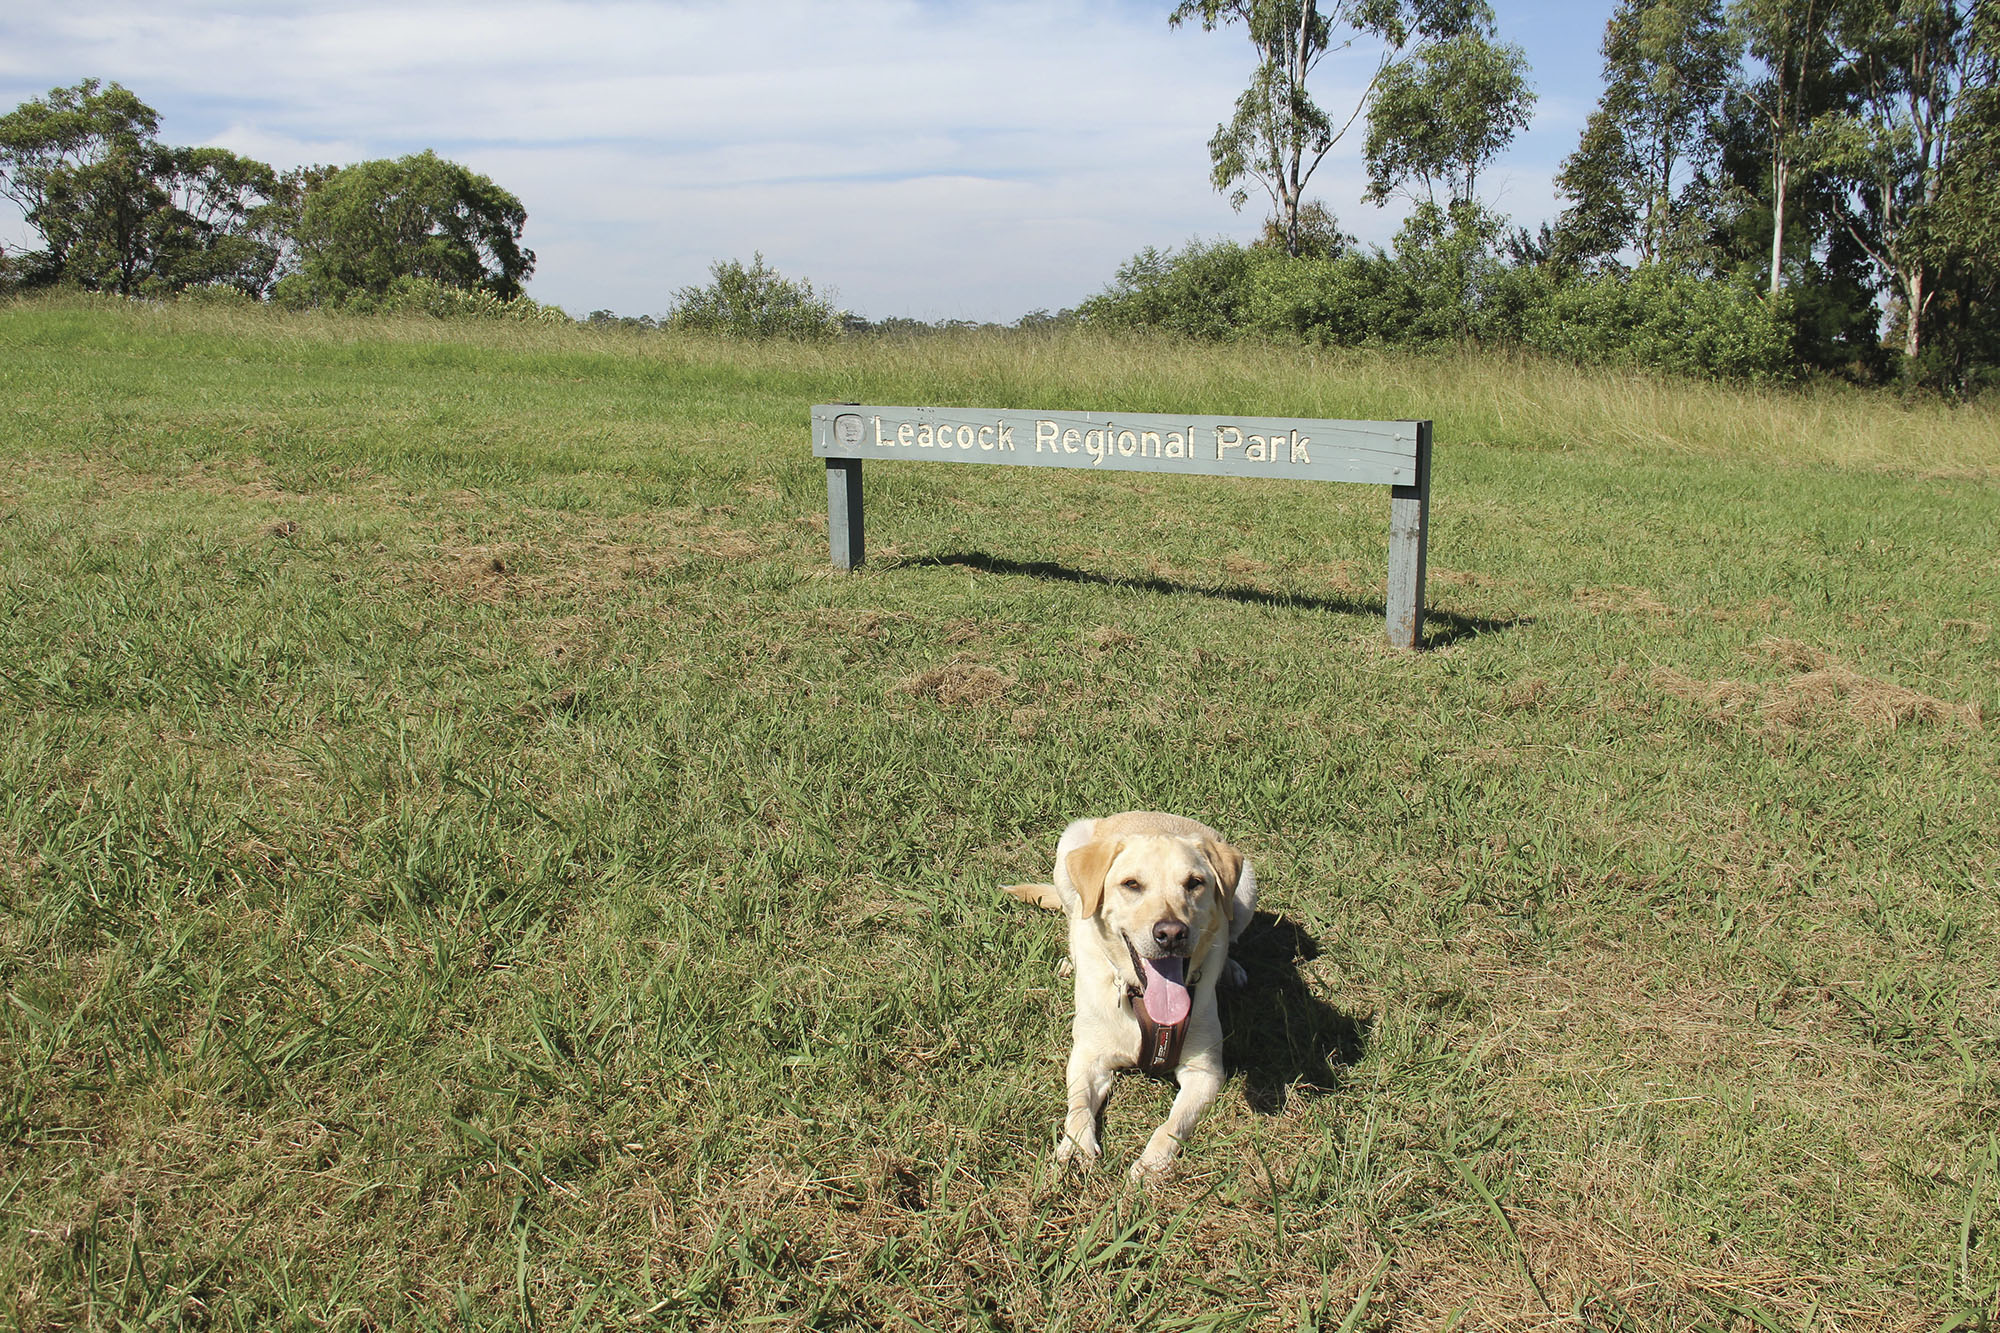 A dog sitting in front of a Leacock Regional Park sign. Photo credit: John Spencer/DPIE